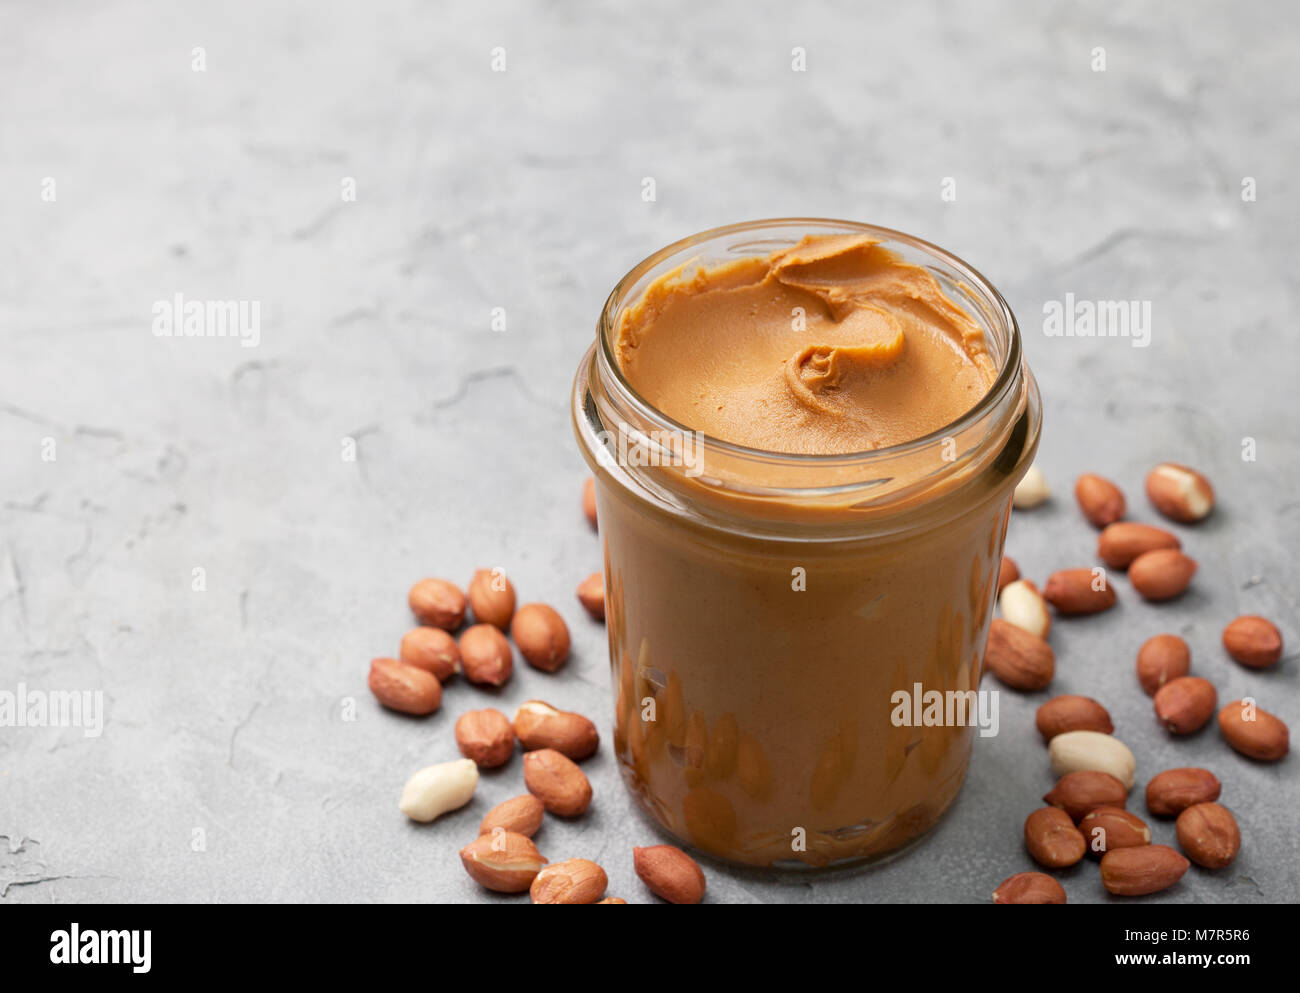 Jar with peanut butter and knife butter smear isolated on white background.  Ameriacan dessert concept Stock Photo - Alamy